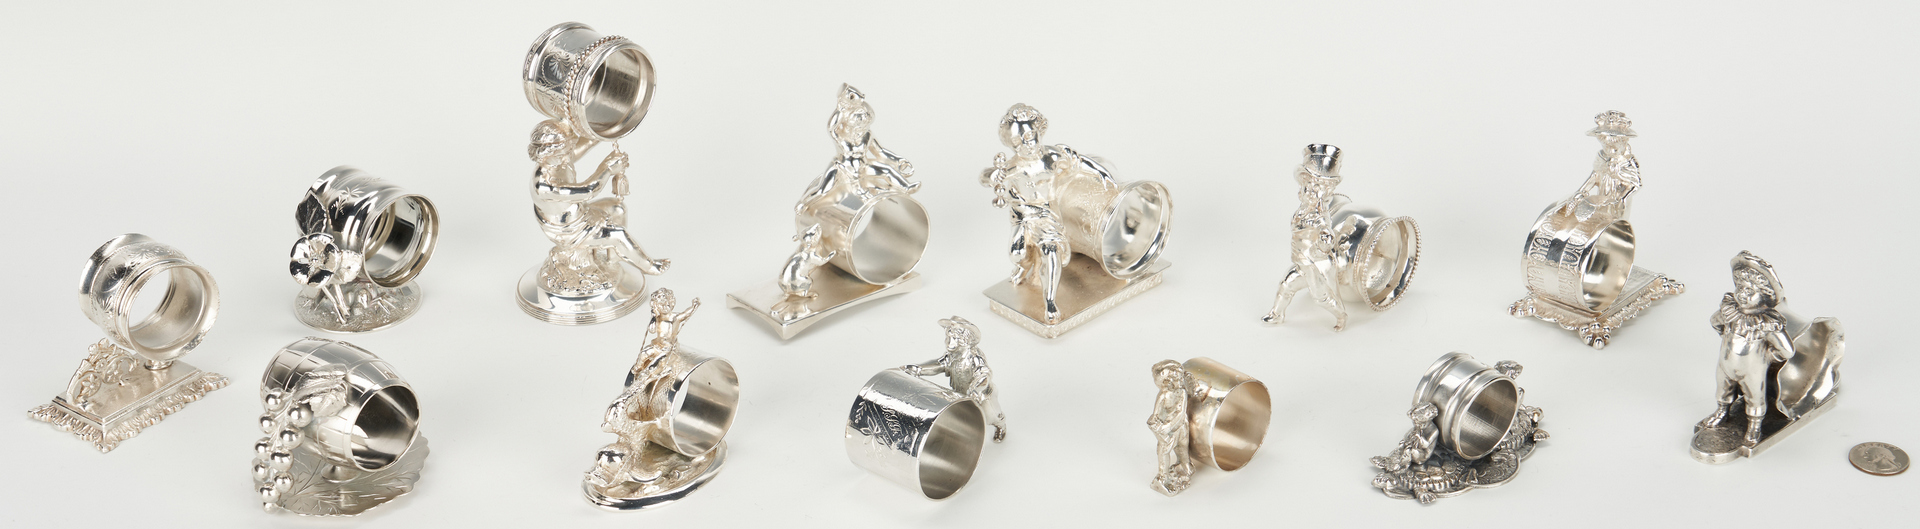 Lot 250: 13 Silverplated Napkin Rings incl. Figural Children